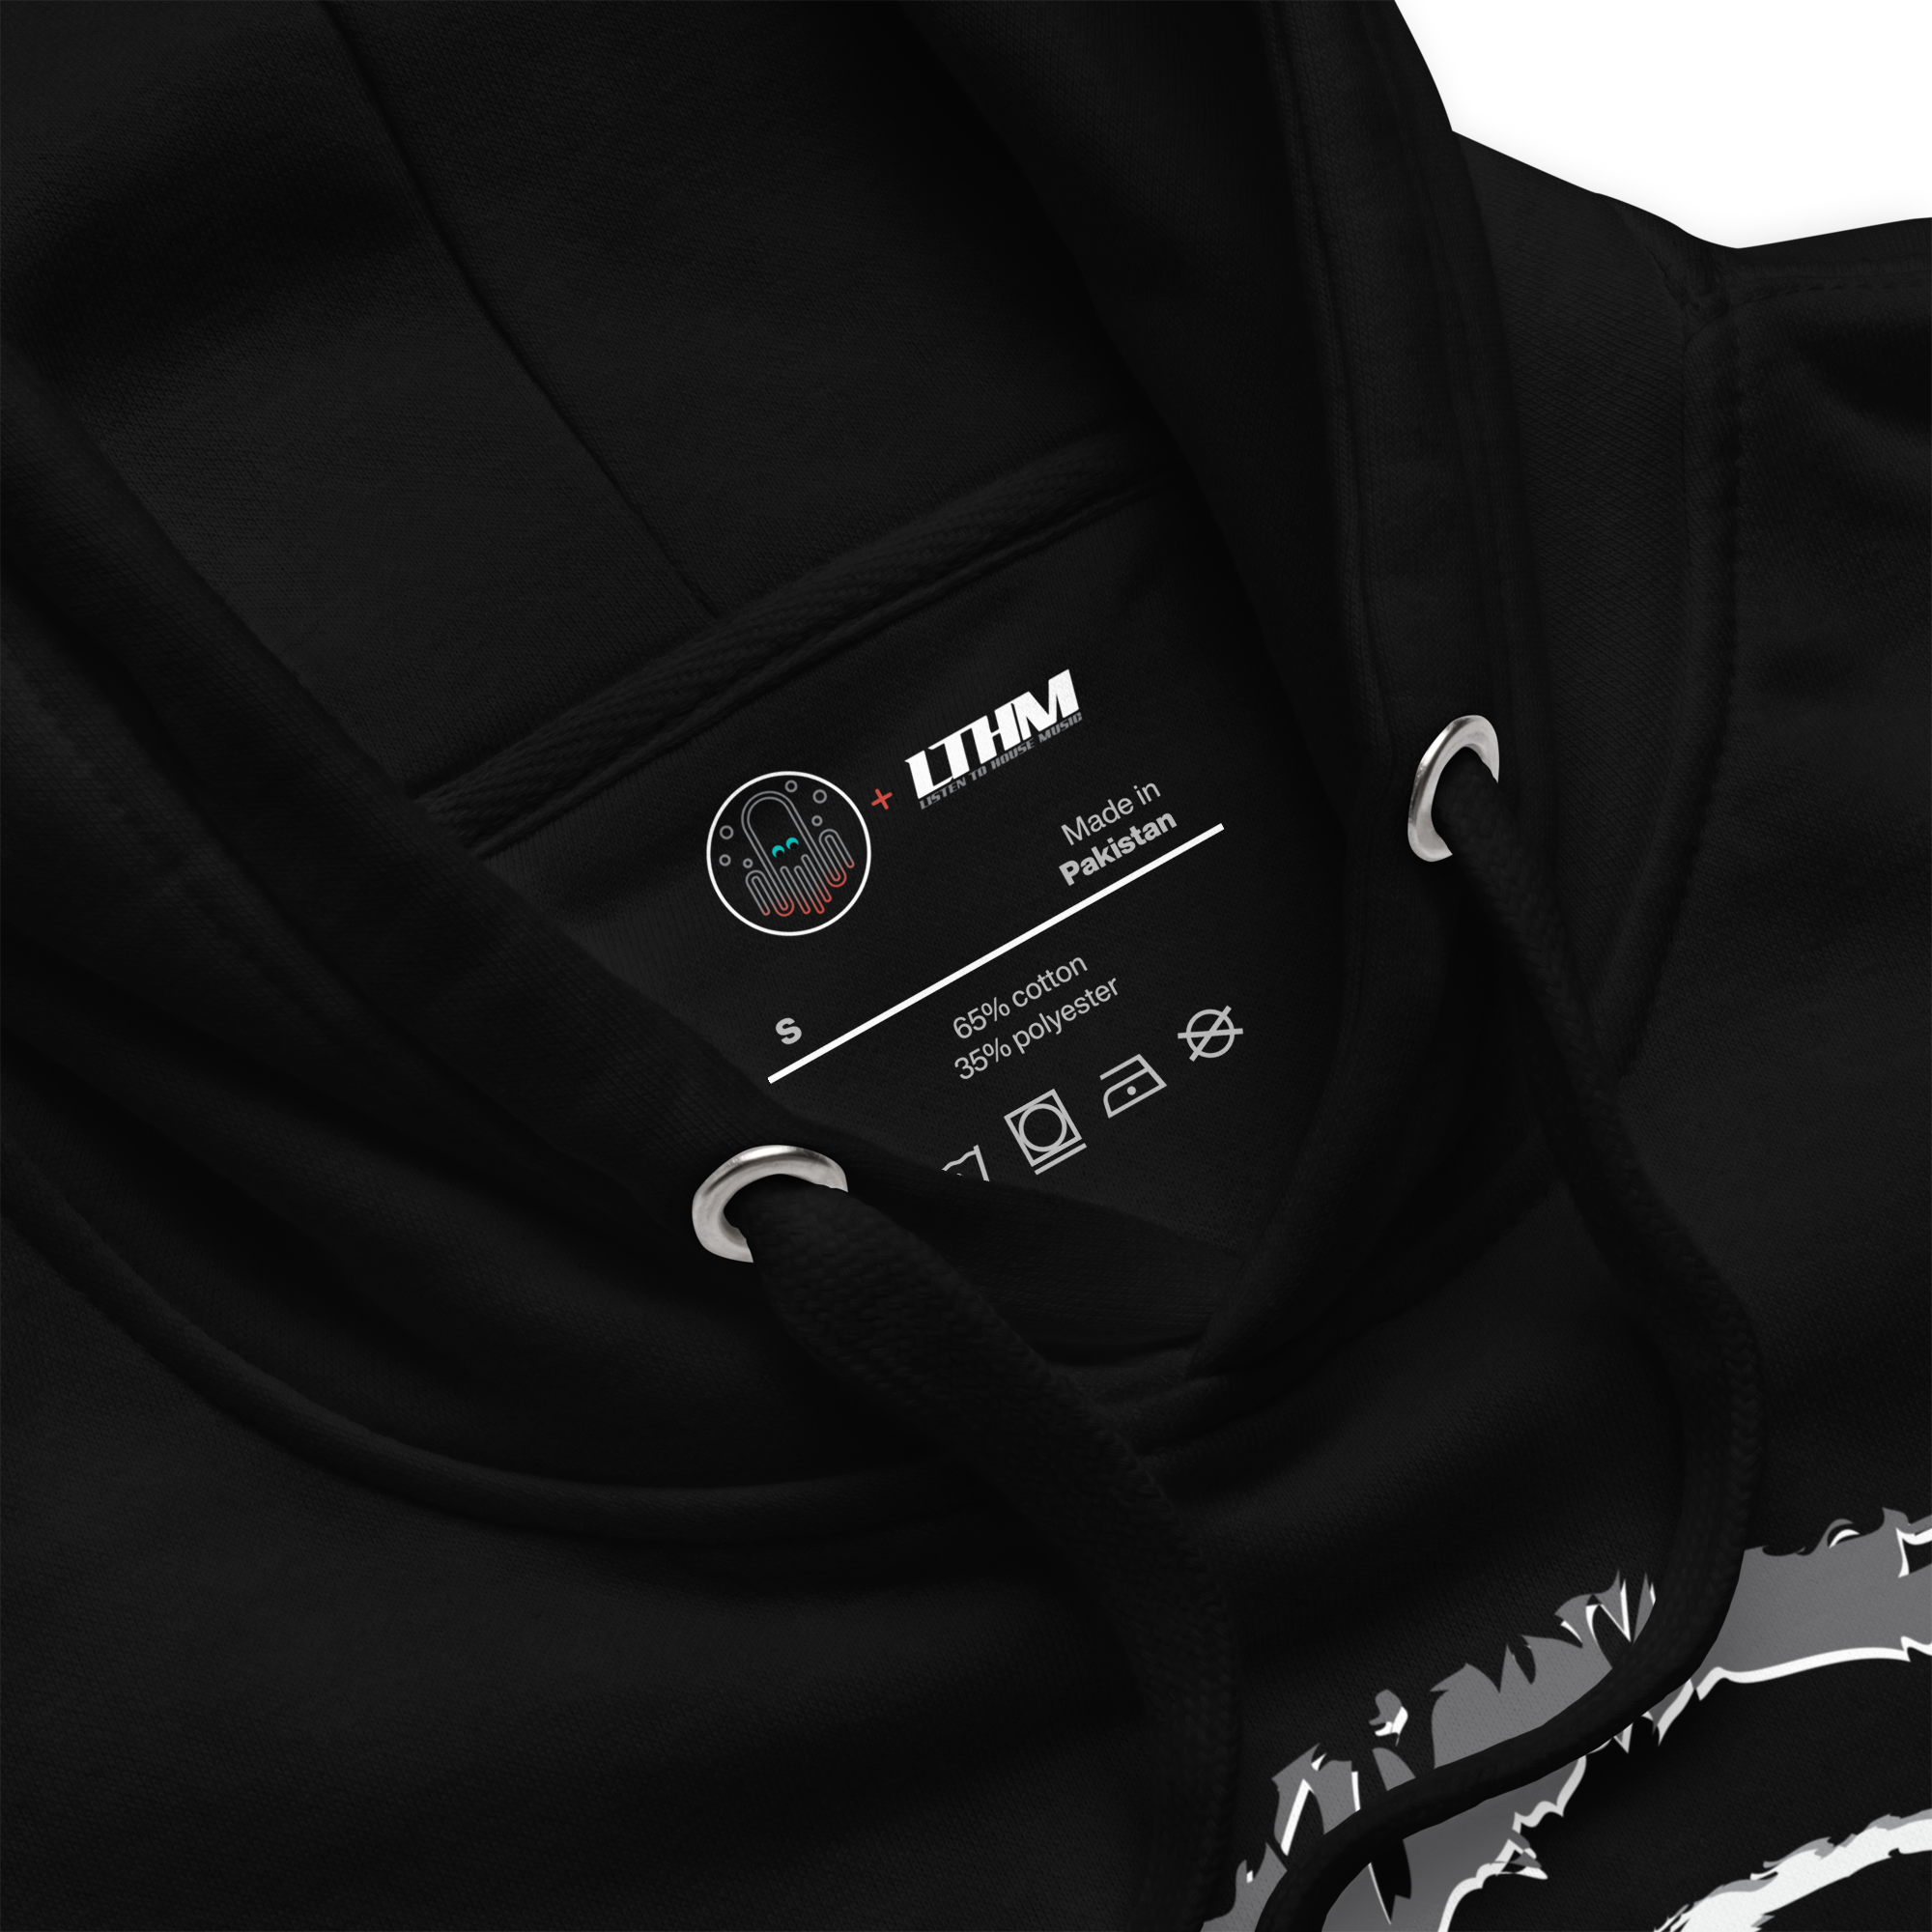 Black Secret Ritual Graphic Hoodie Zoom View of Hood and Inside Label